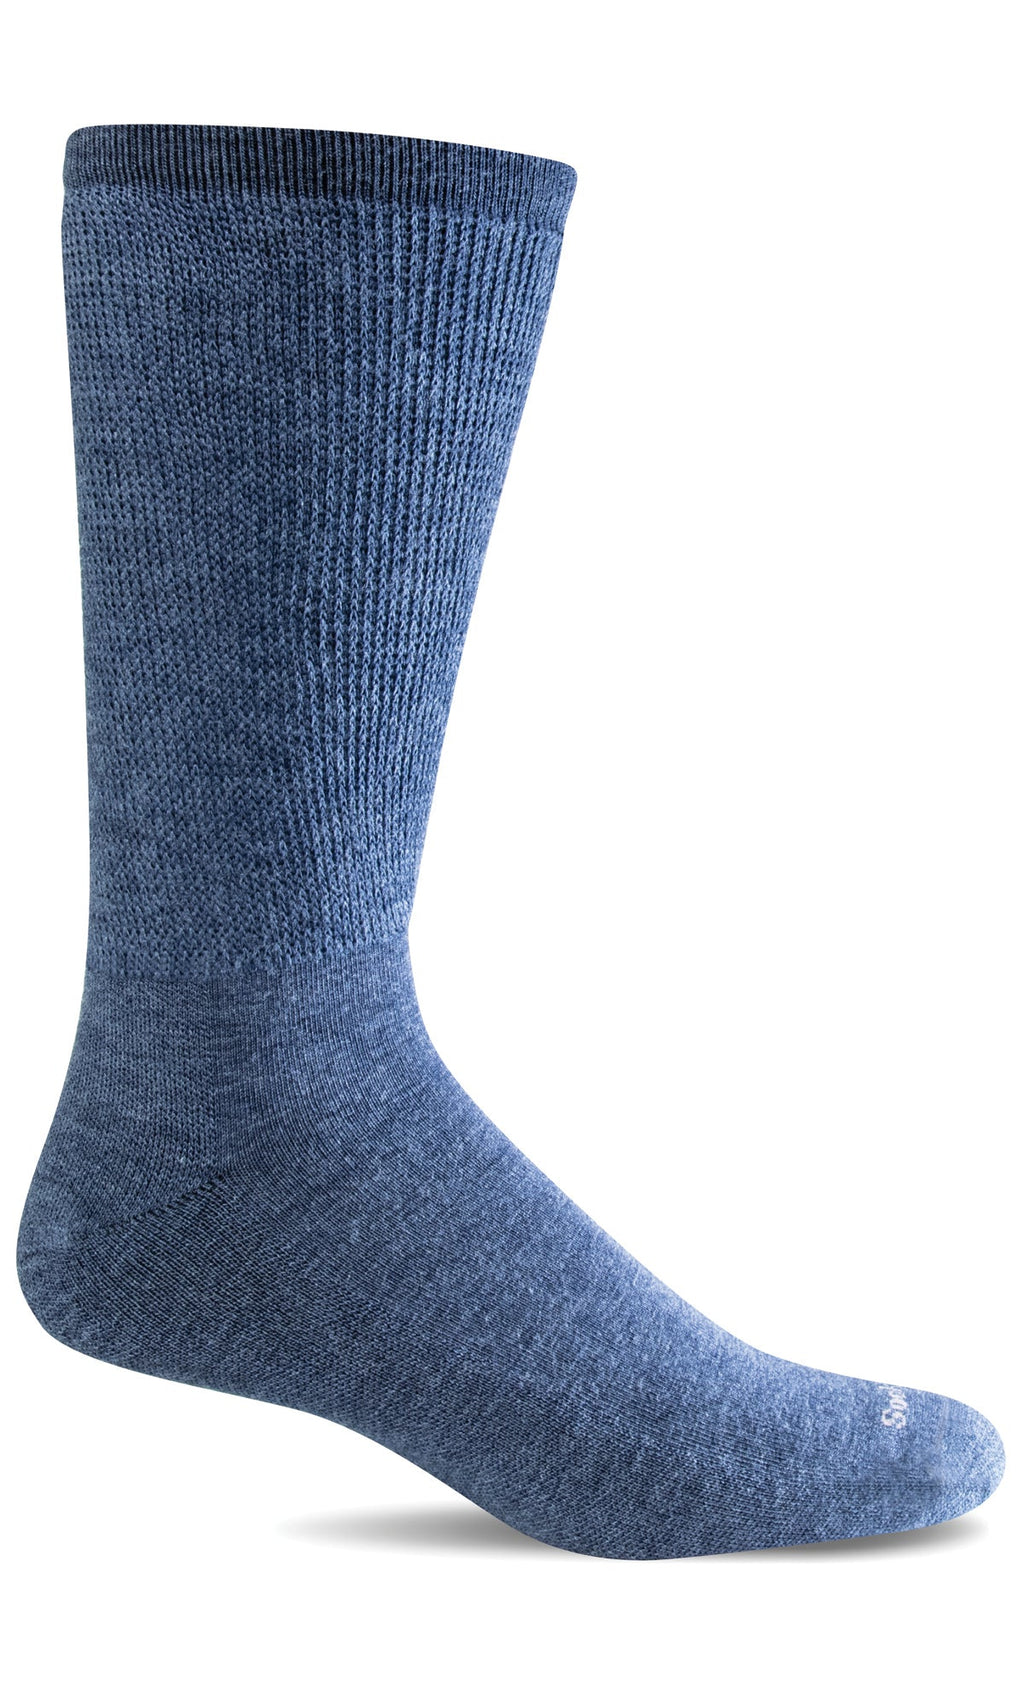 Men's Extra Easy | Relaxed Fit Socks - Merino Wool Relaxed Fit/Diabetic Friendly - Sockwell